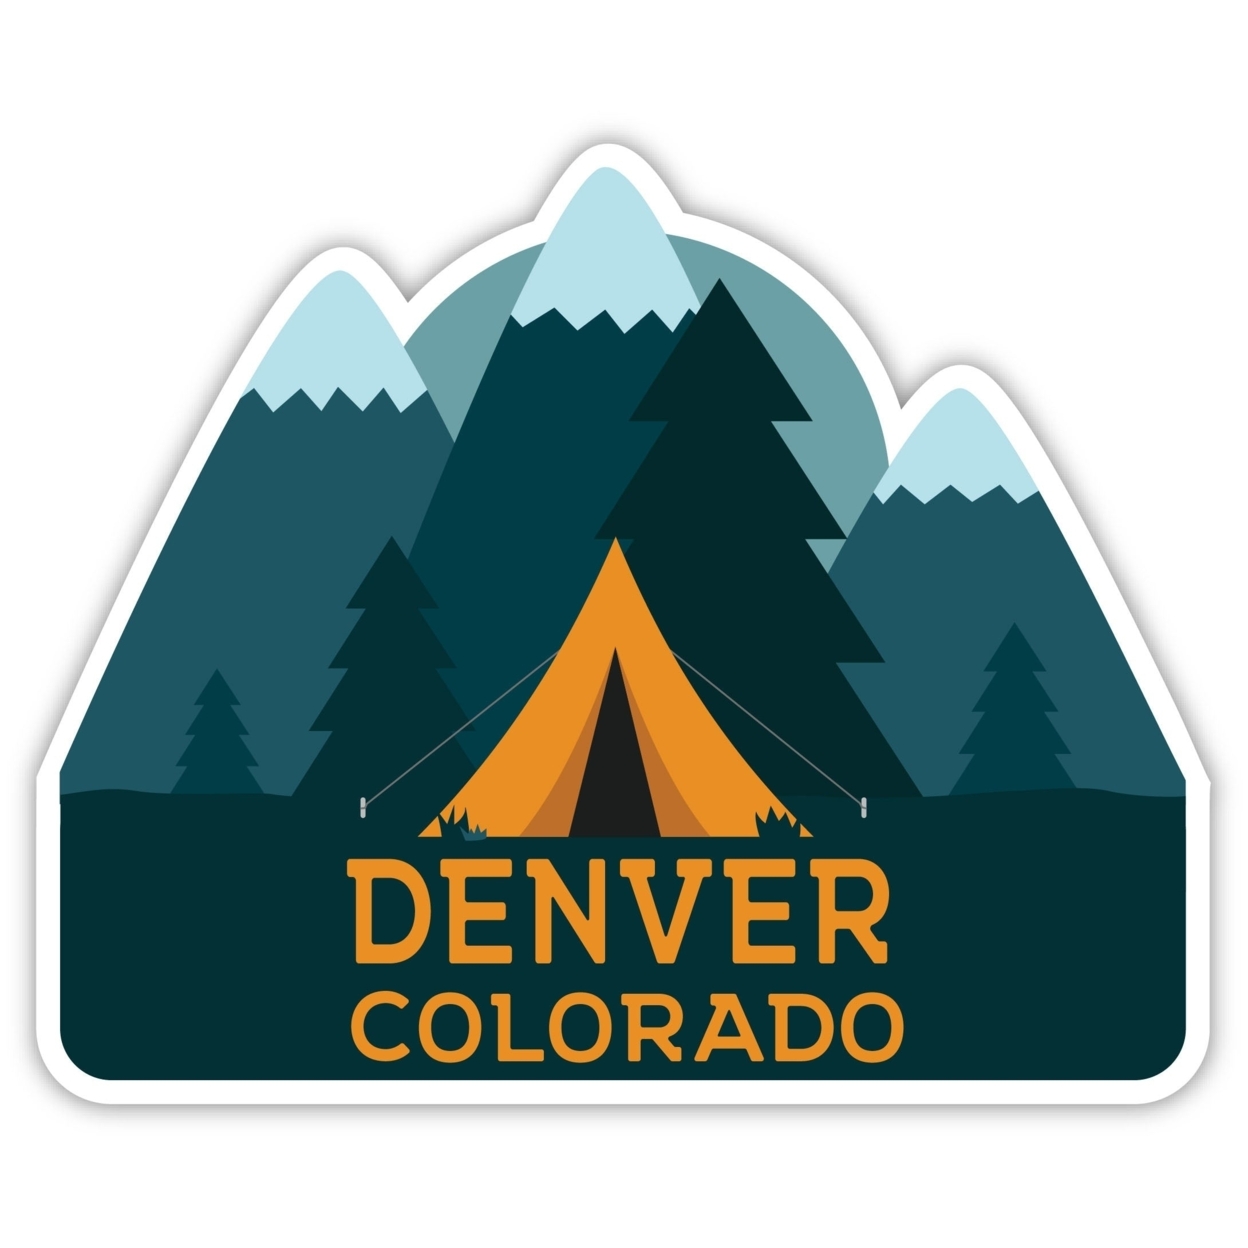 Denver Colorado Souvenir Decorative Stickers (Choose Theme And Size) - 4-Pack, 4-Inch, Great Outdoors